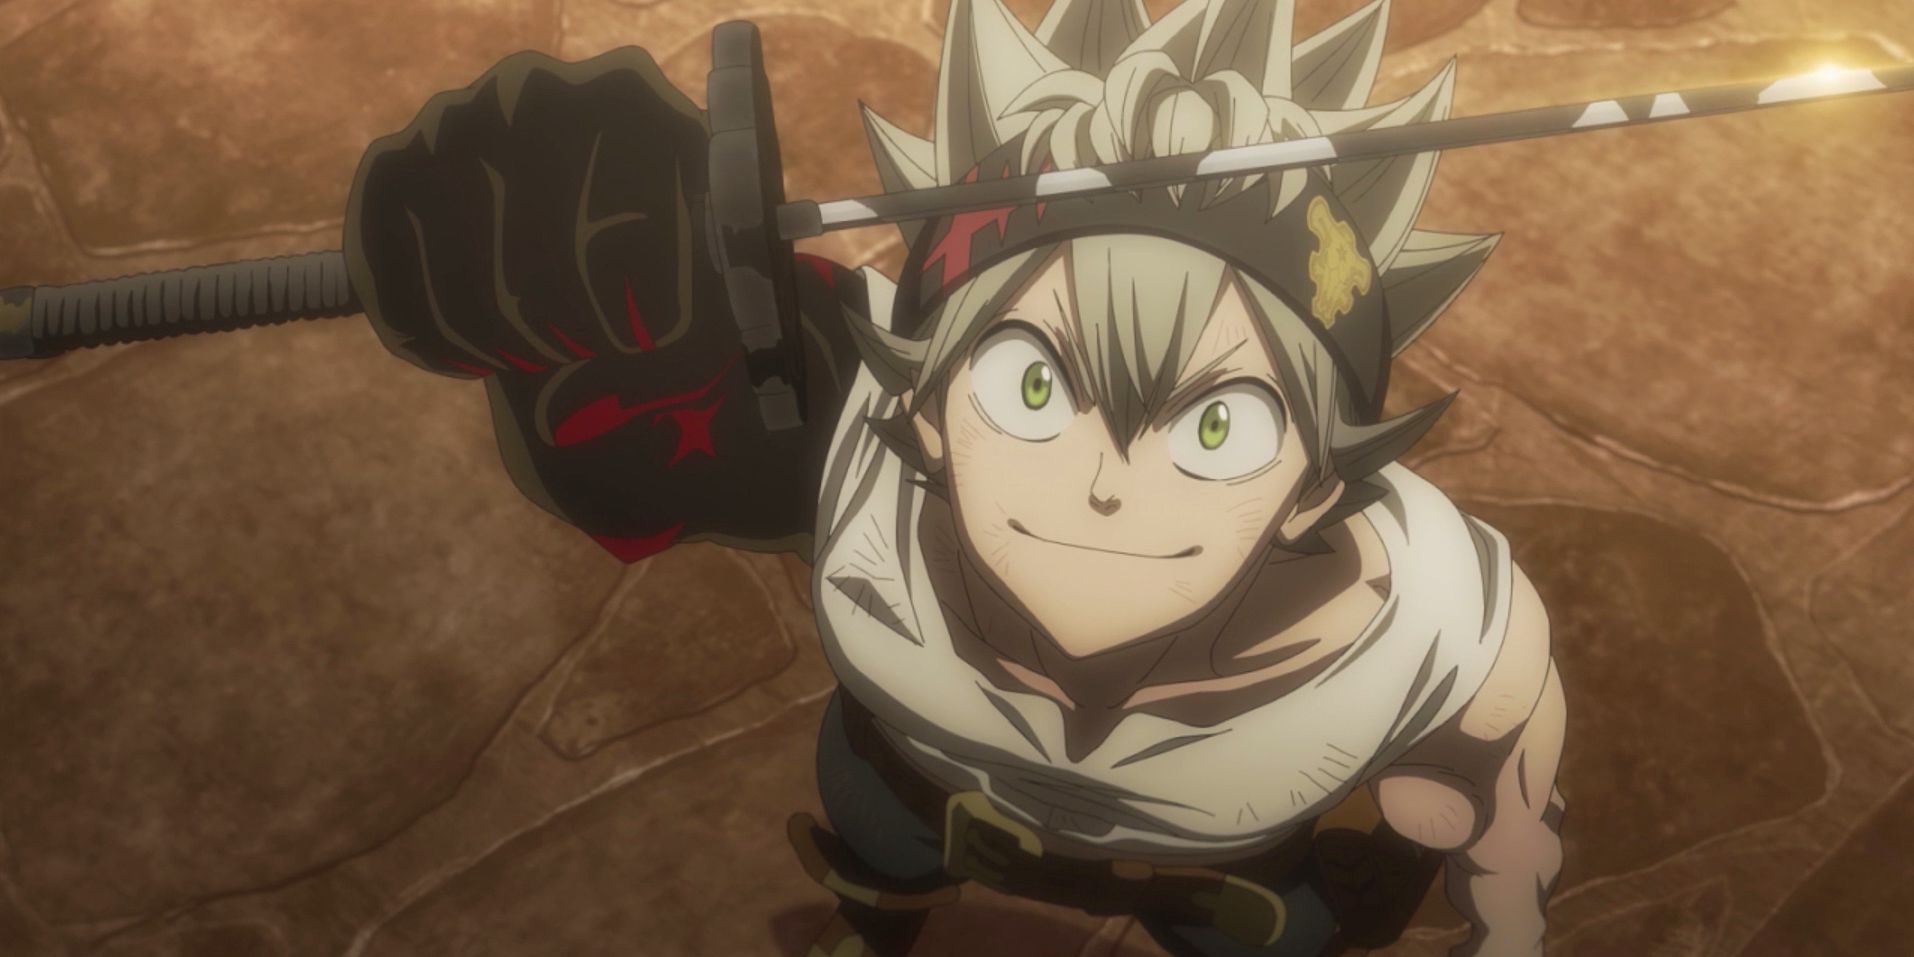 Asta in Black Clover Episode 170 final scene, looking up and grinning.